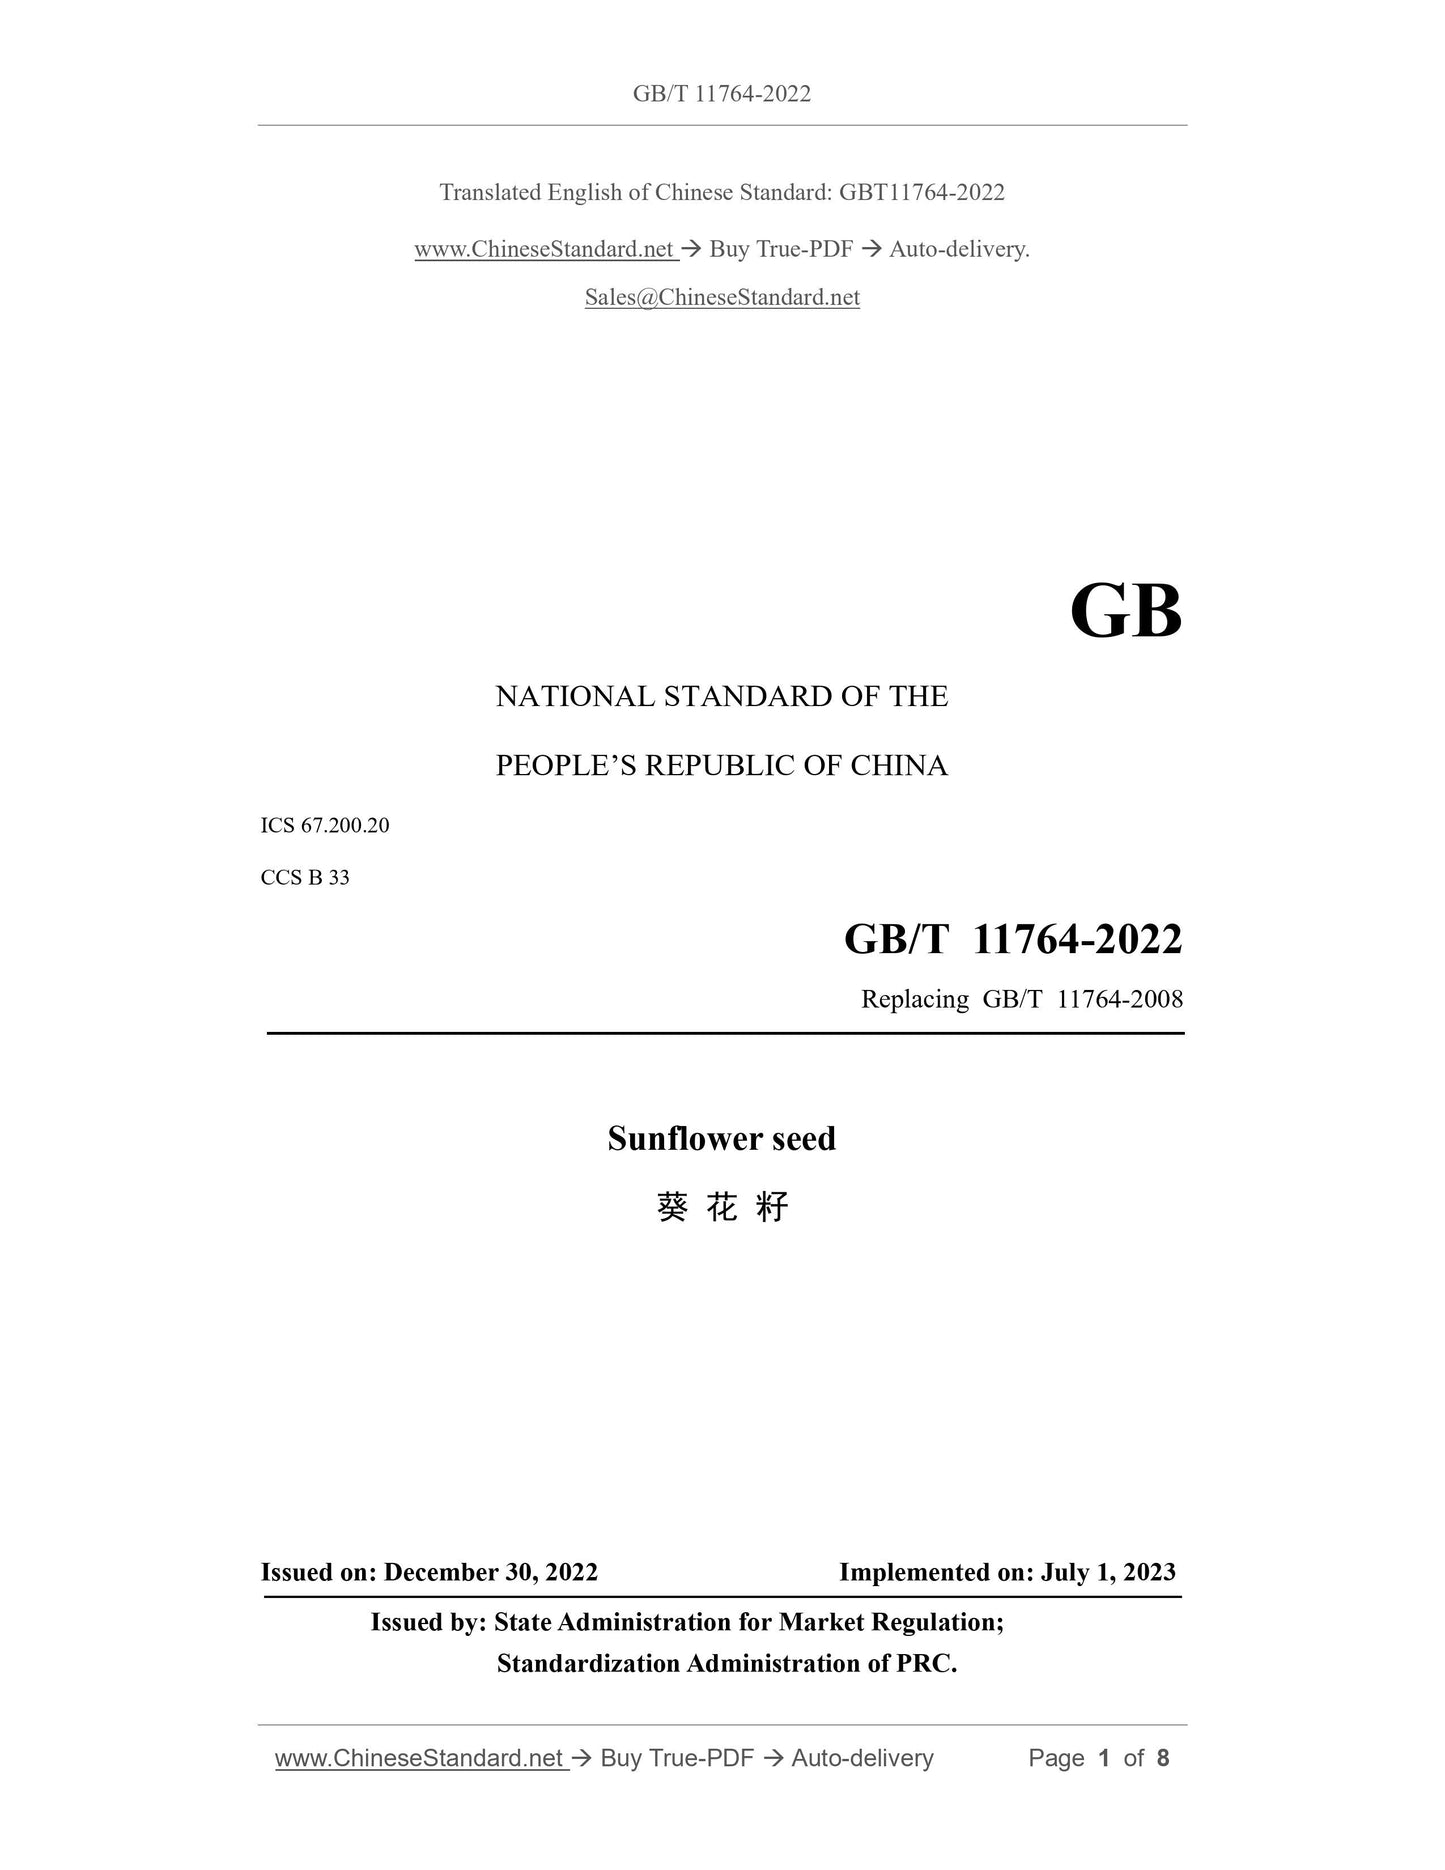 GB/T 11764-2022 Page 1